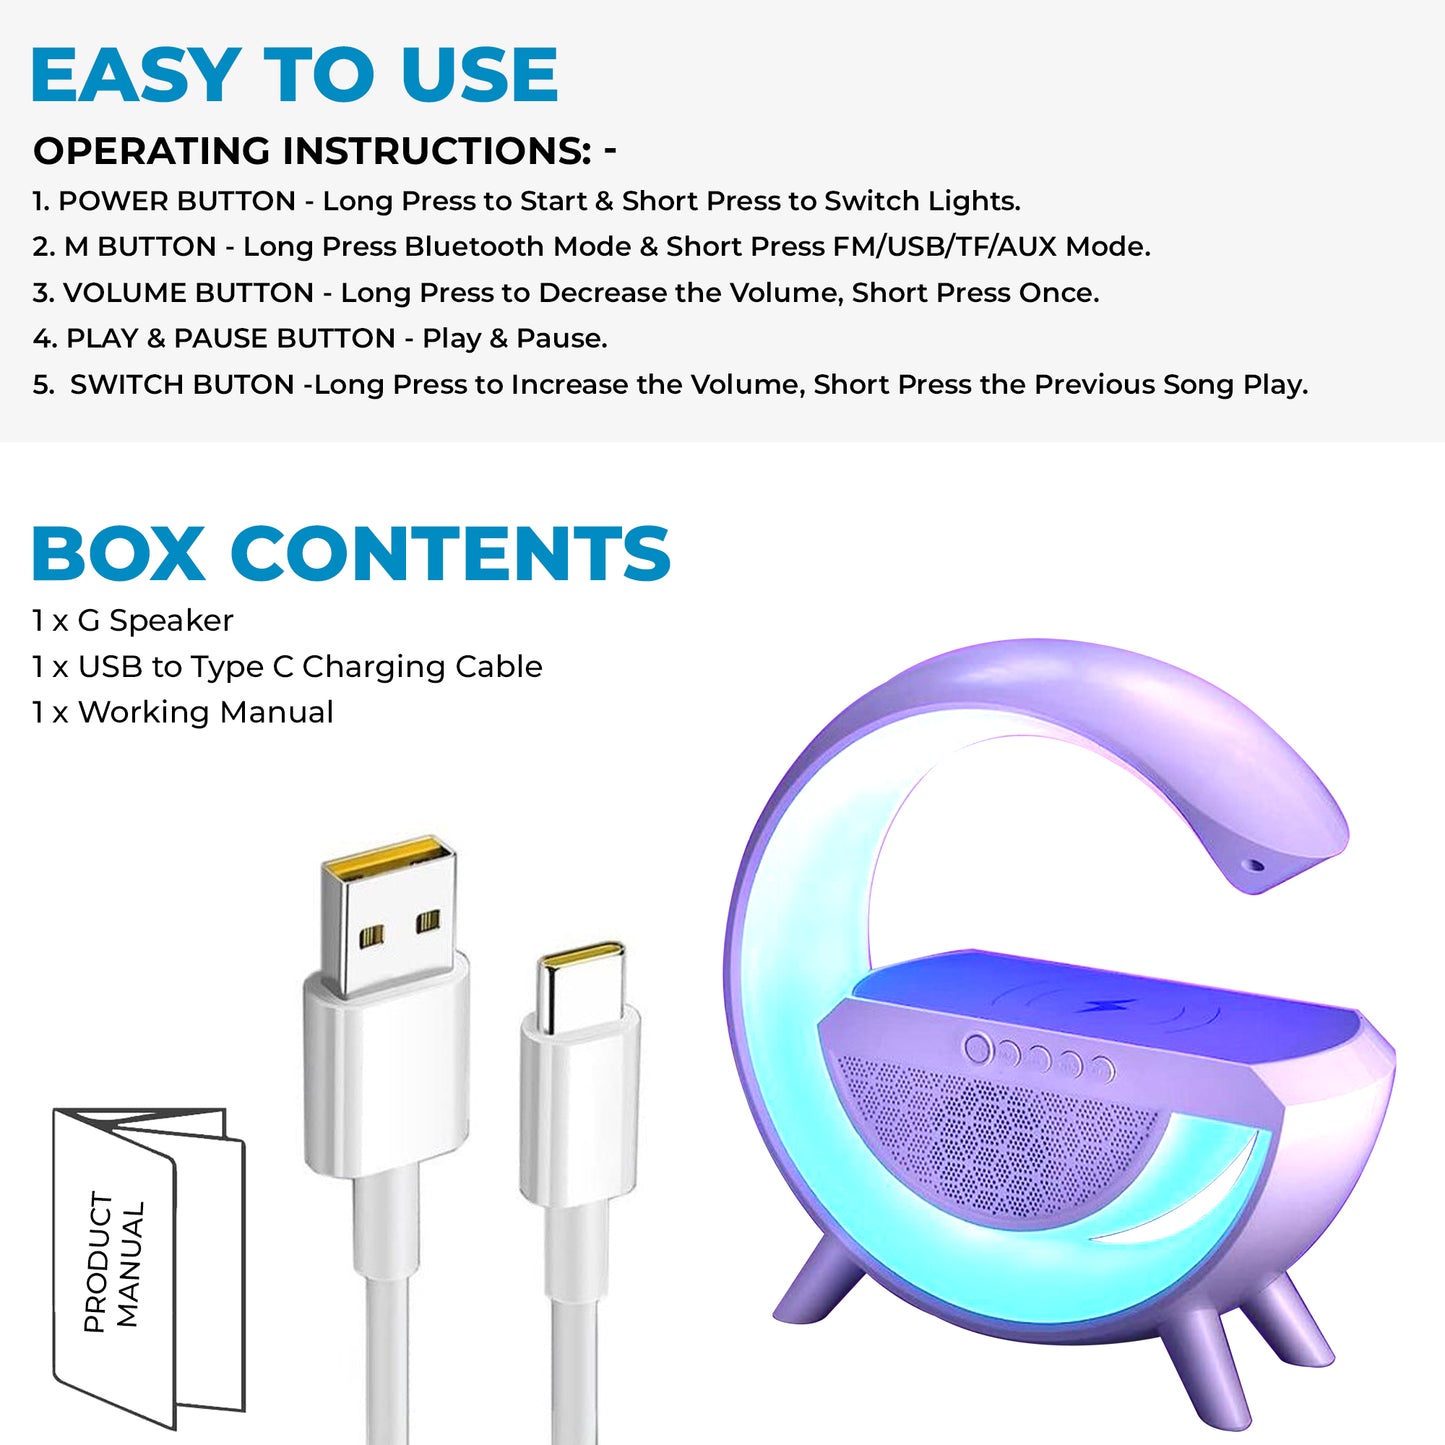 WRADER Wireless Charger Accessory Combo for 3in1 G Shape Bluetooth Speaker Wireless Charging Supported iOS Phone and Mobiles